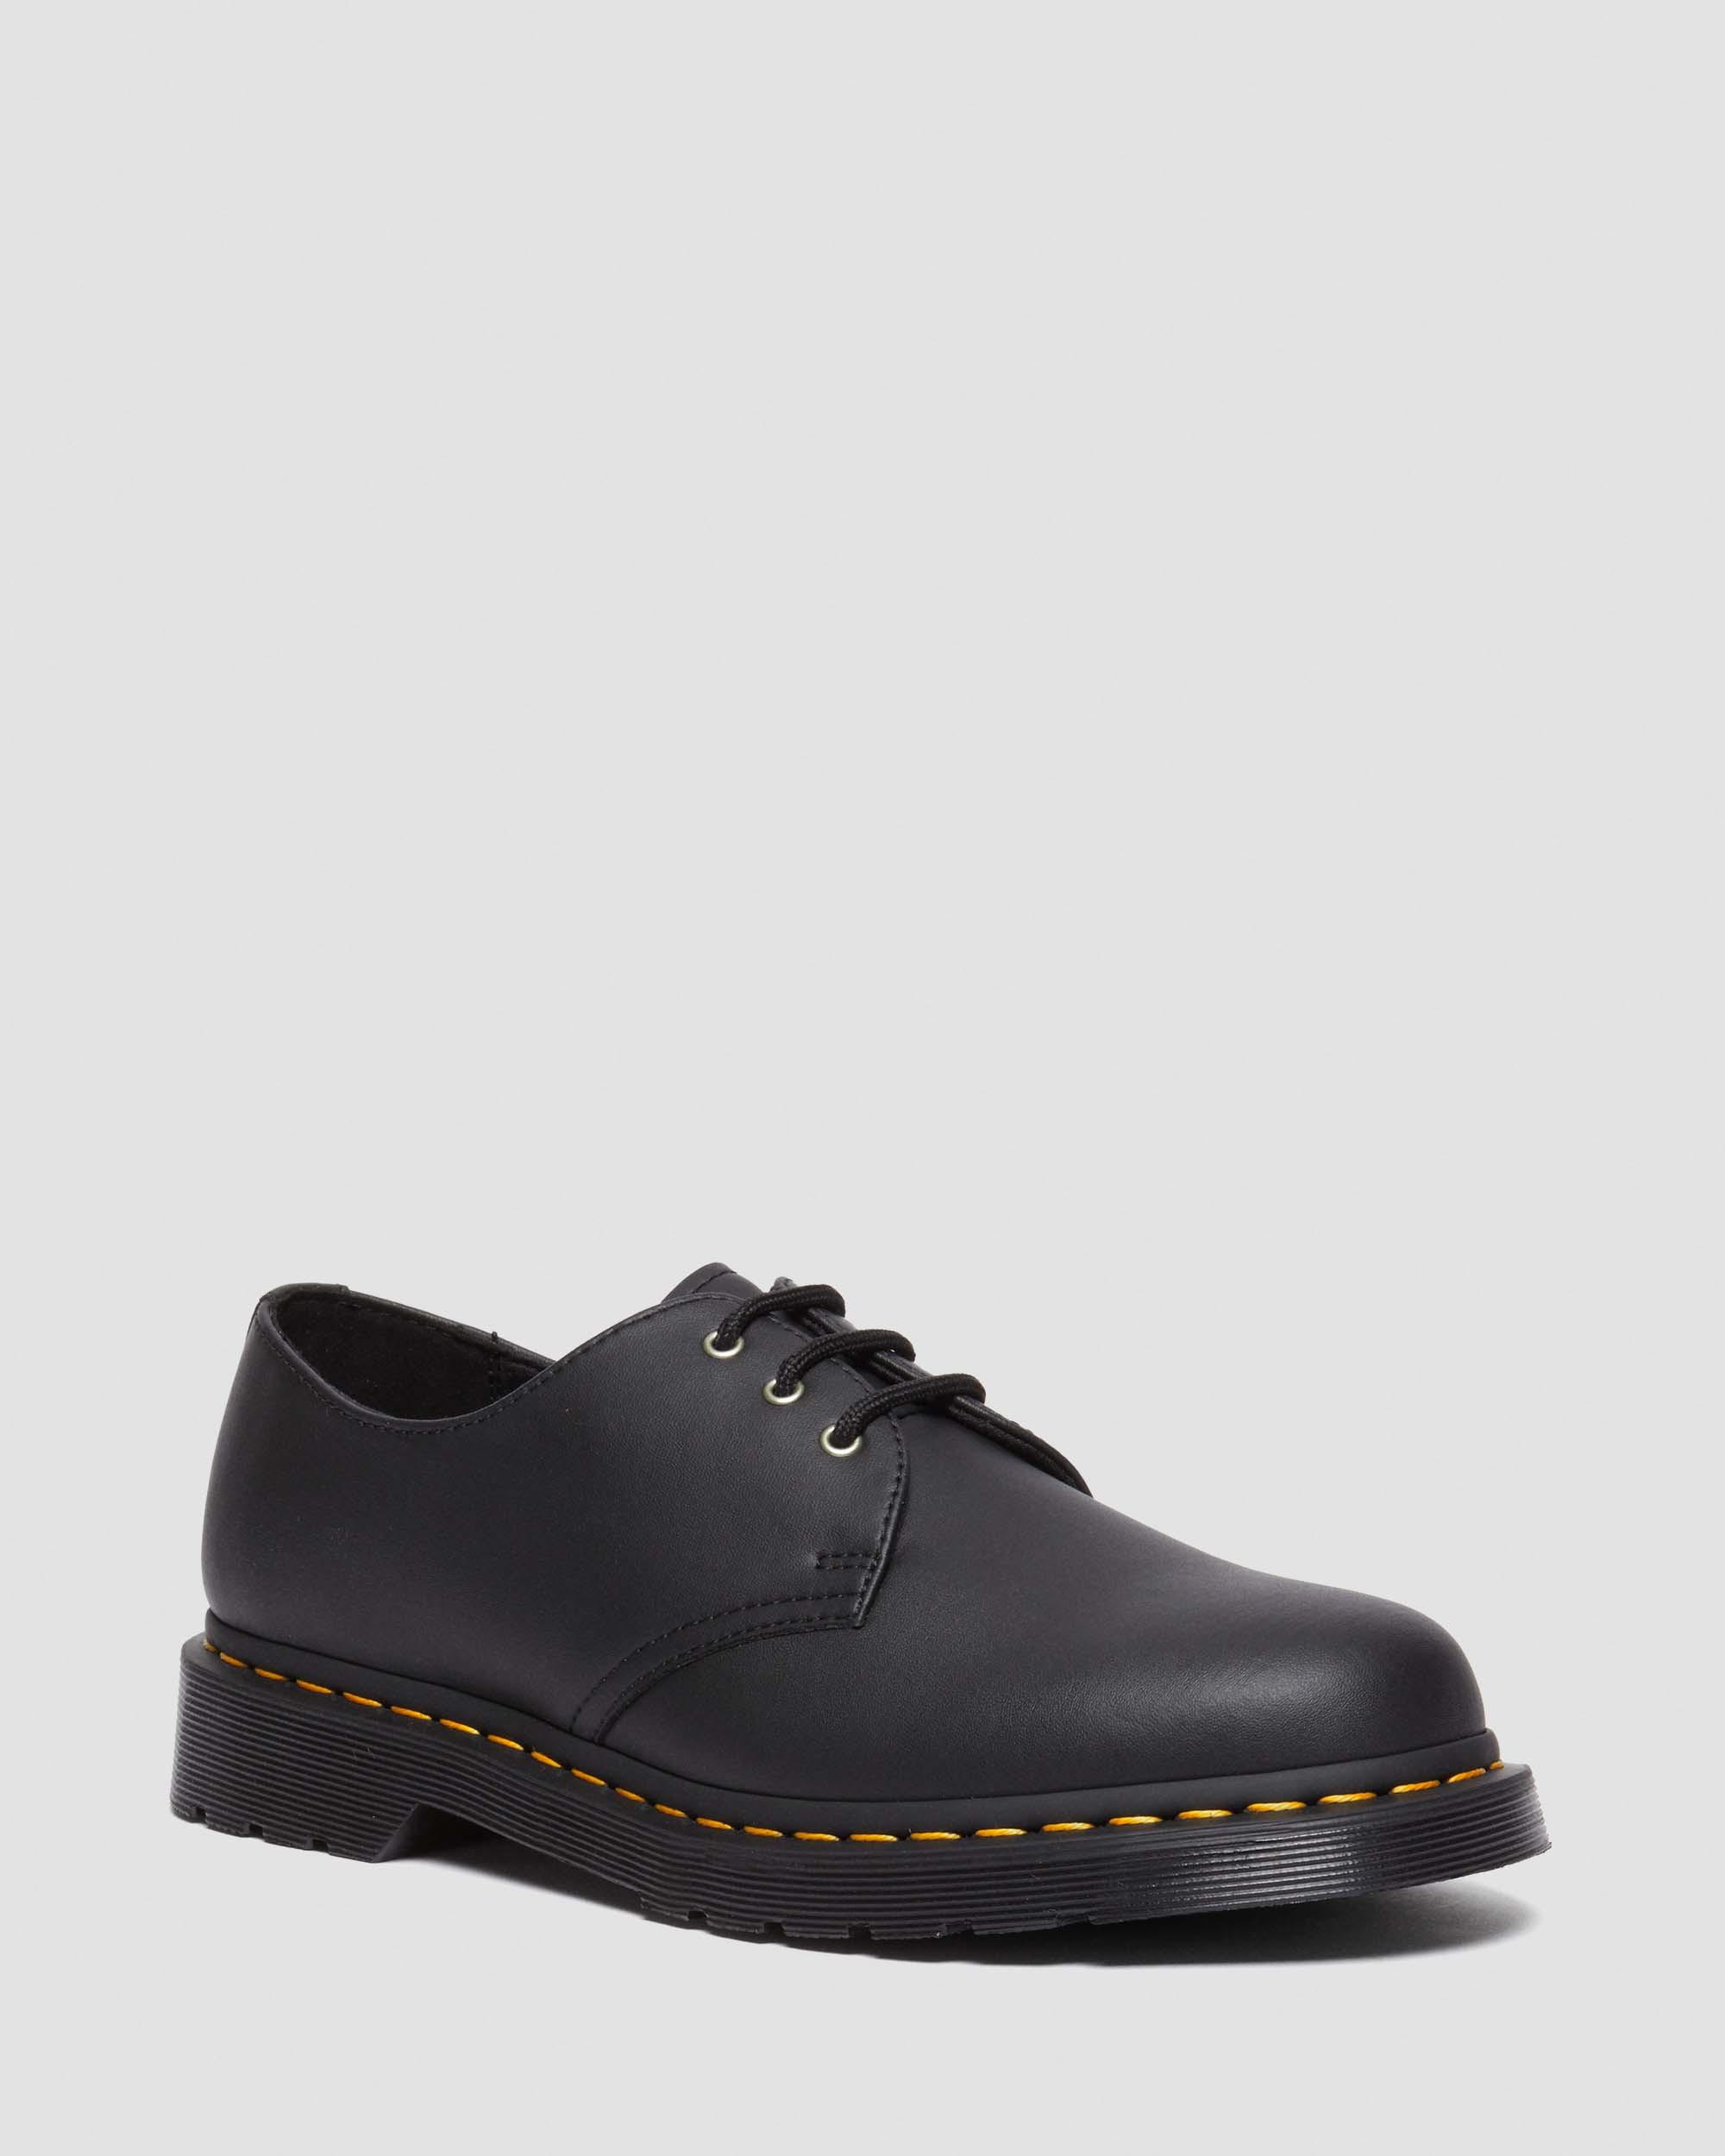 1461 Reclaimed Leather Oxford Shoes